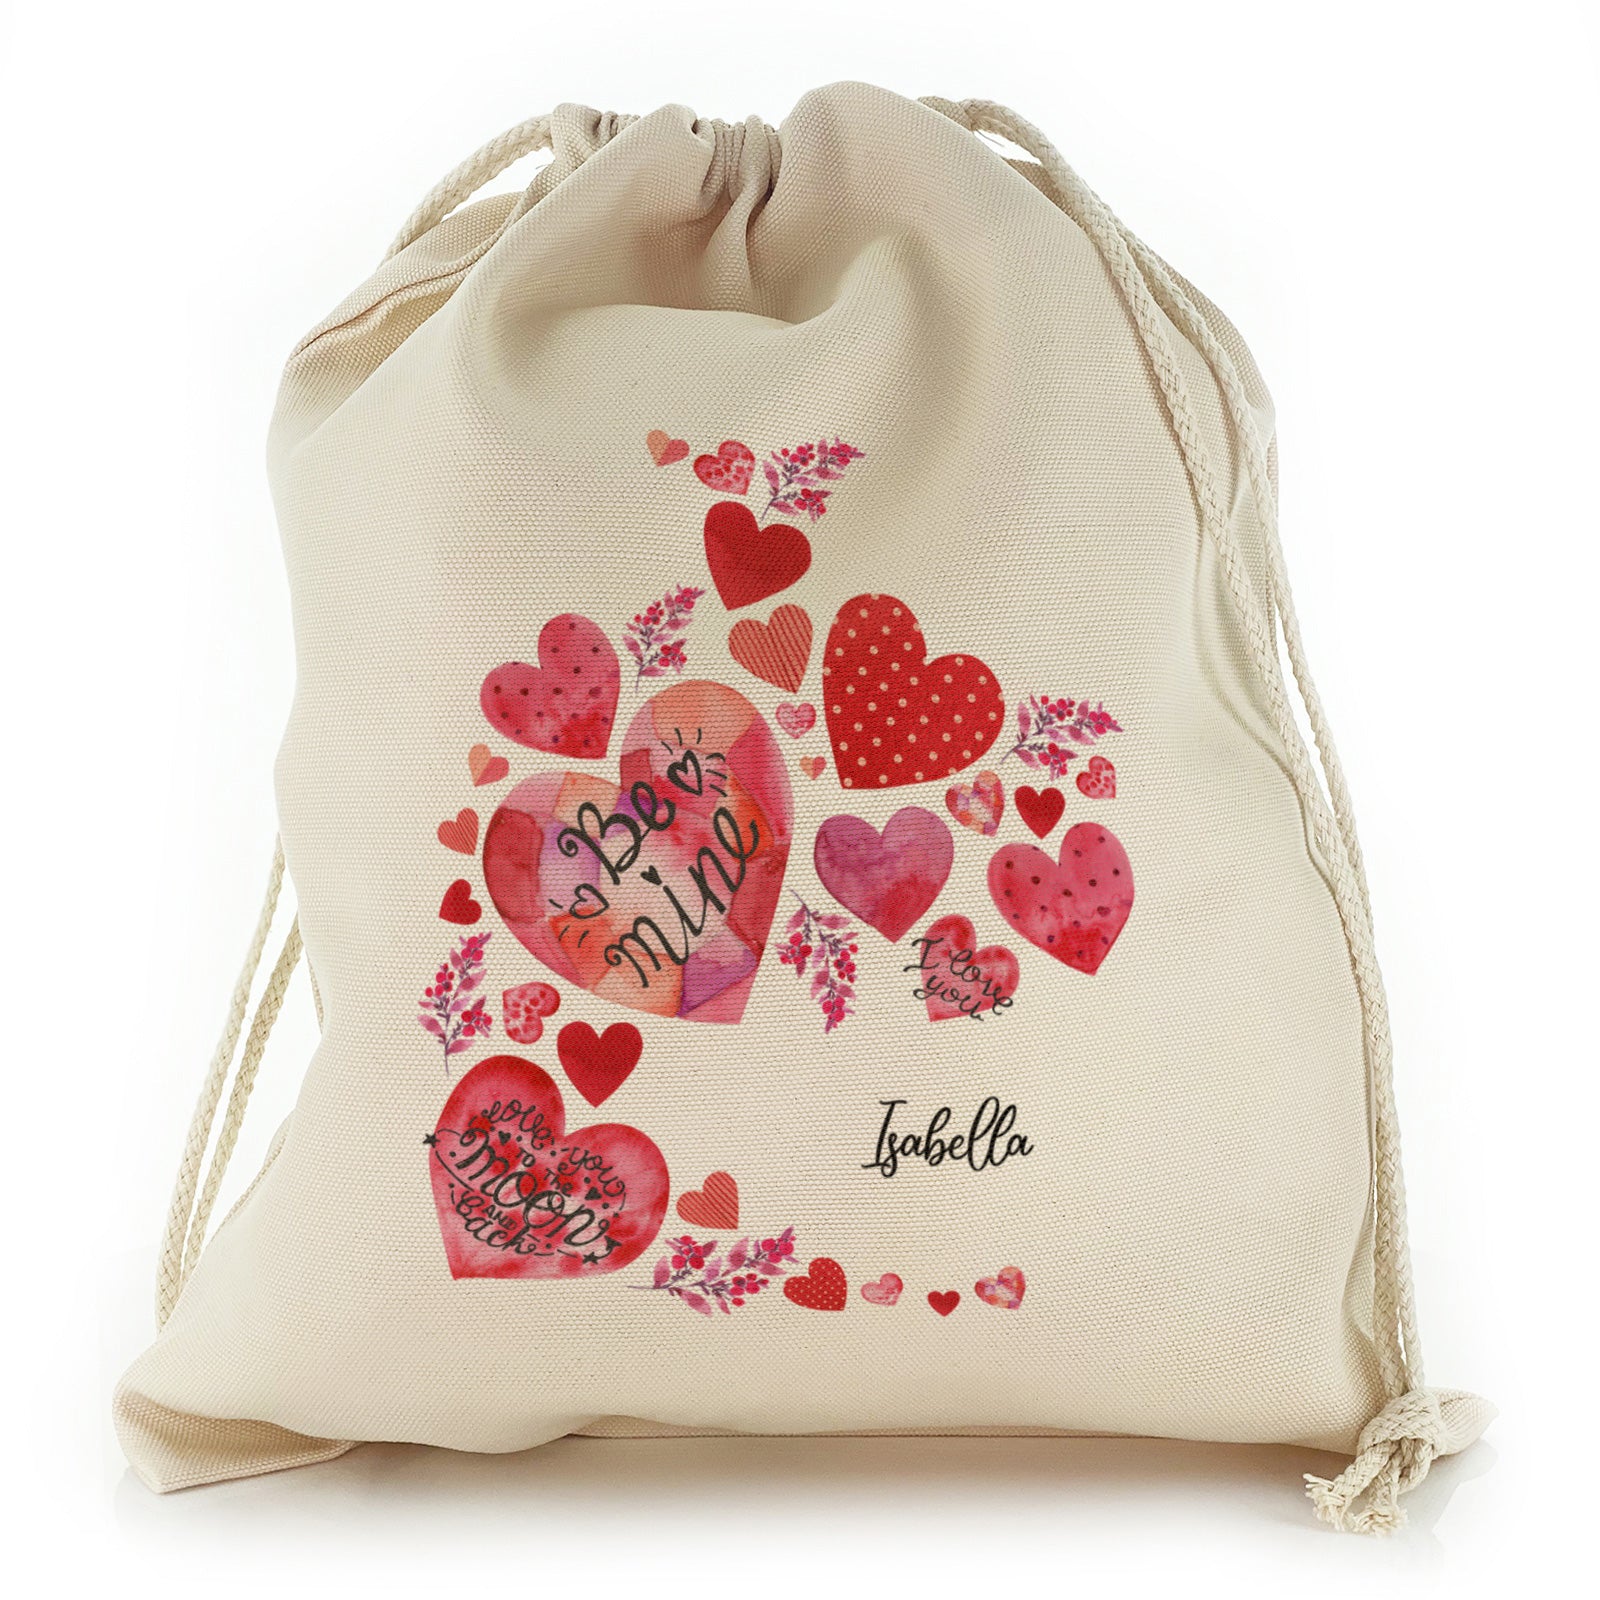 Personalised Canvas Sack with Stylish Text and Material Hearts Love Message Print